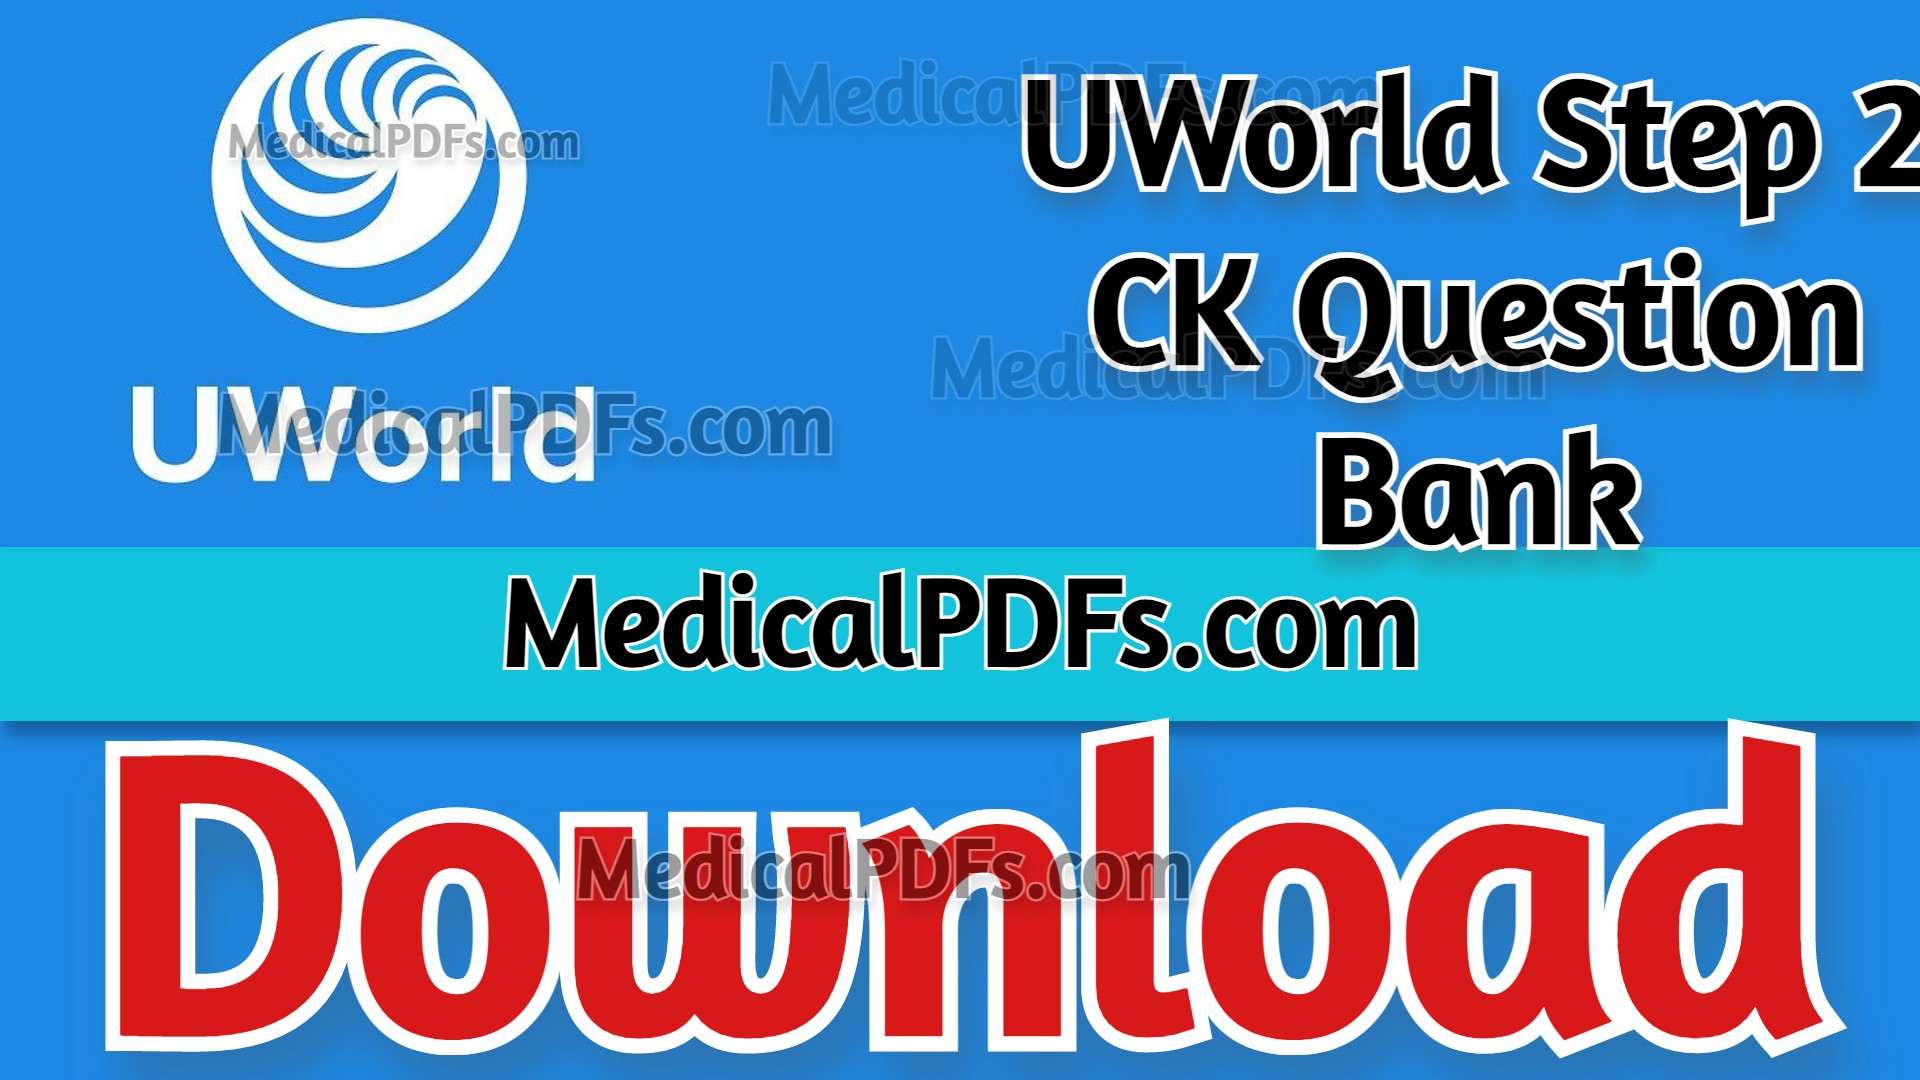 UWorld Step 2 CK Question Bank August 2022 Download Free Medical PDFs